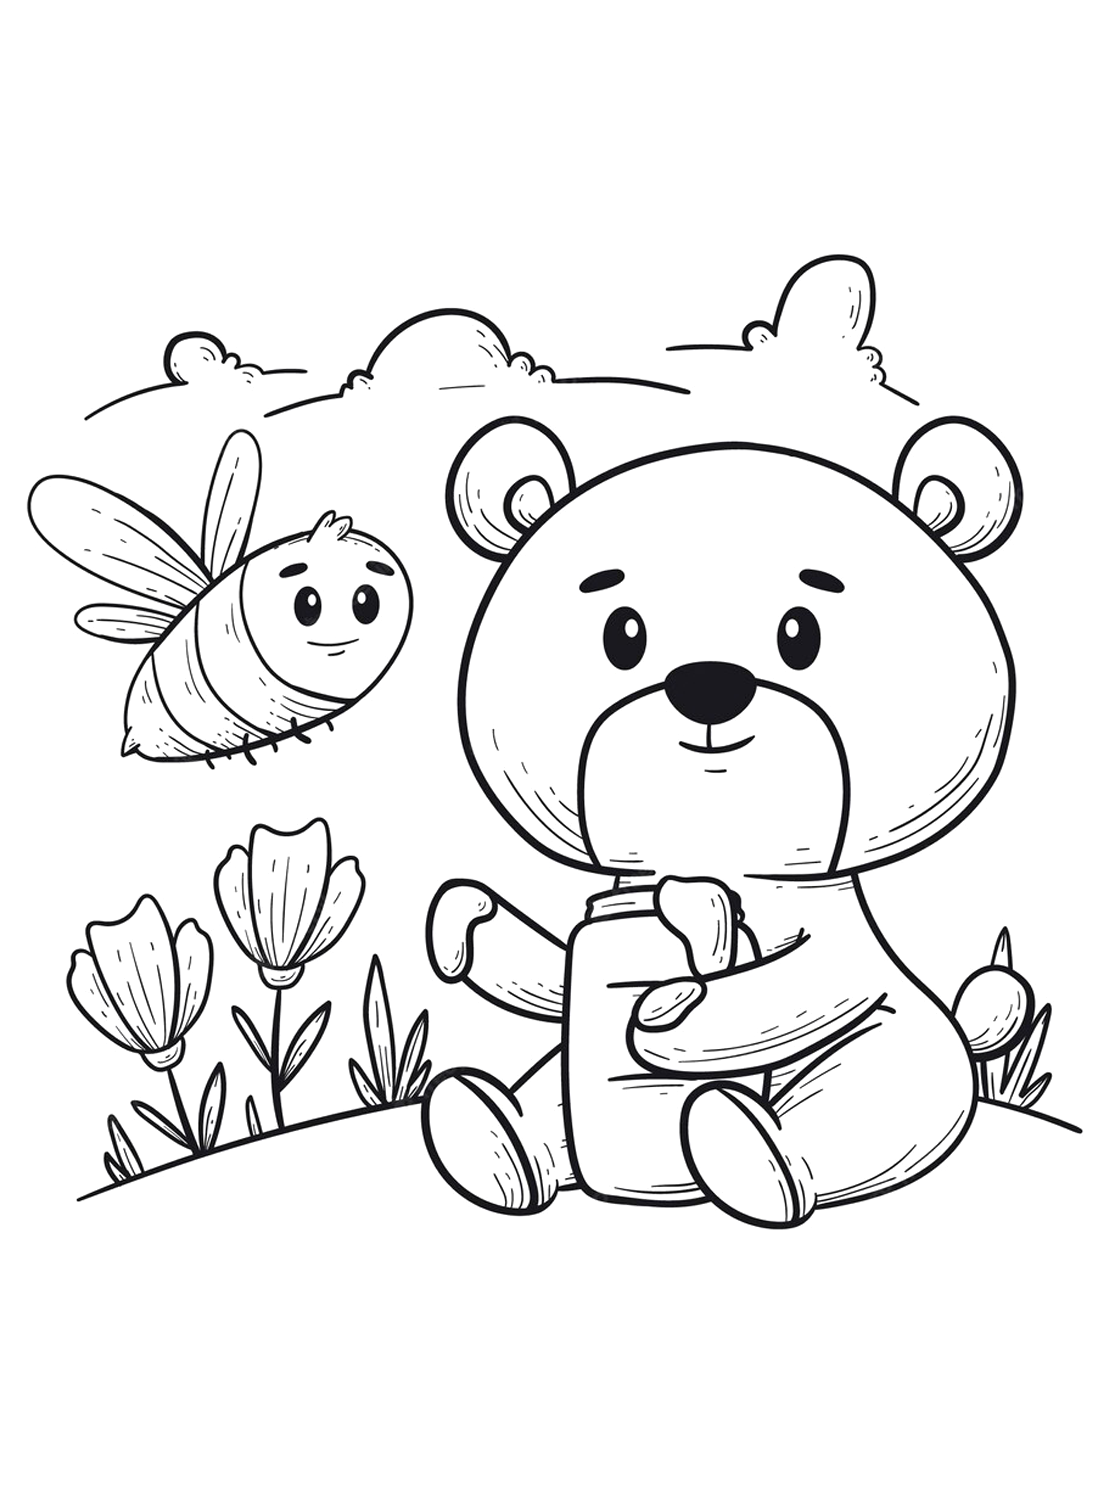 Insect and Teddy bear color sheet